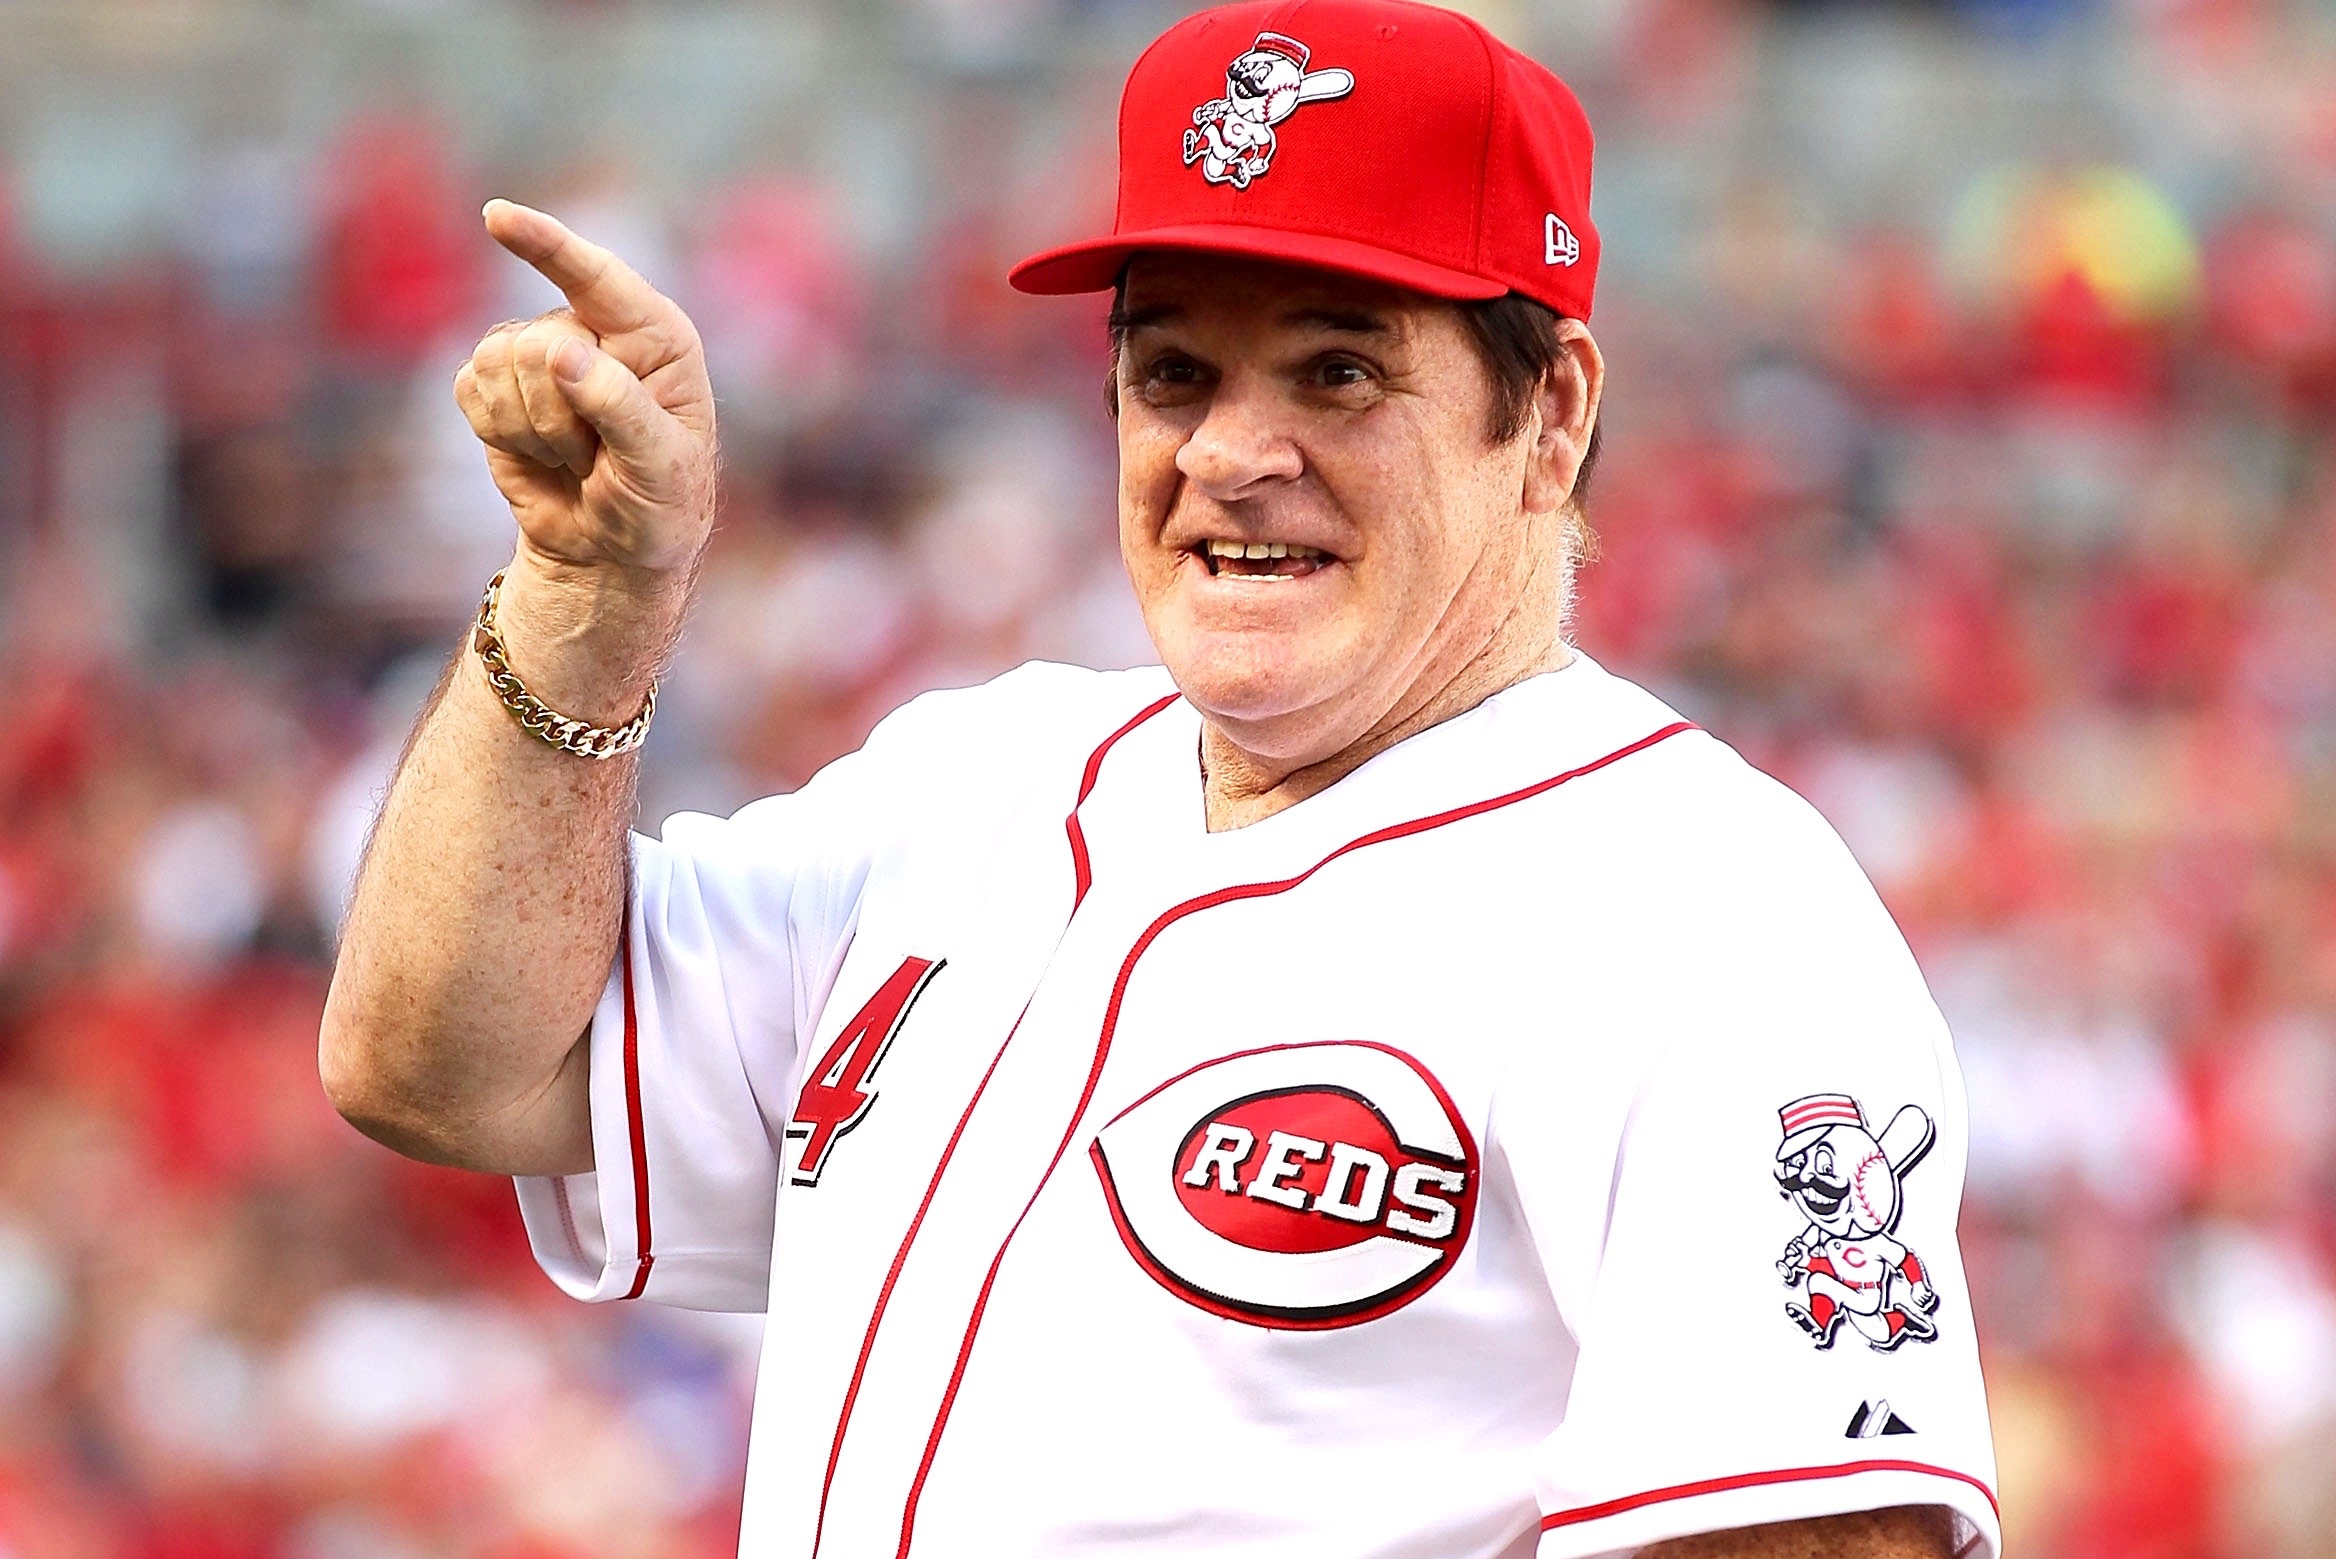 5: The Pete Rose signing